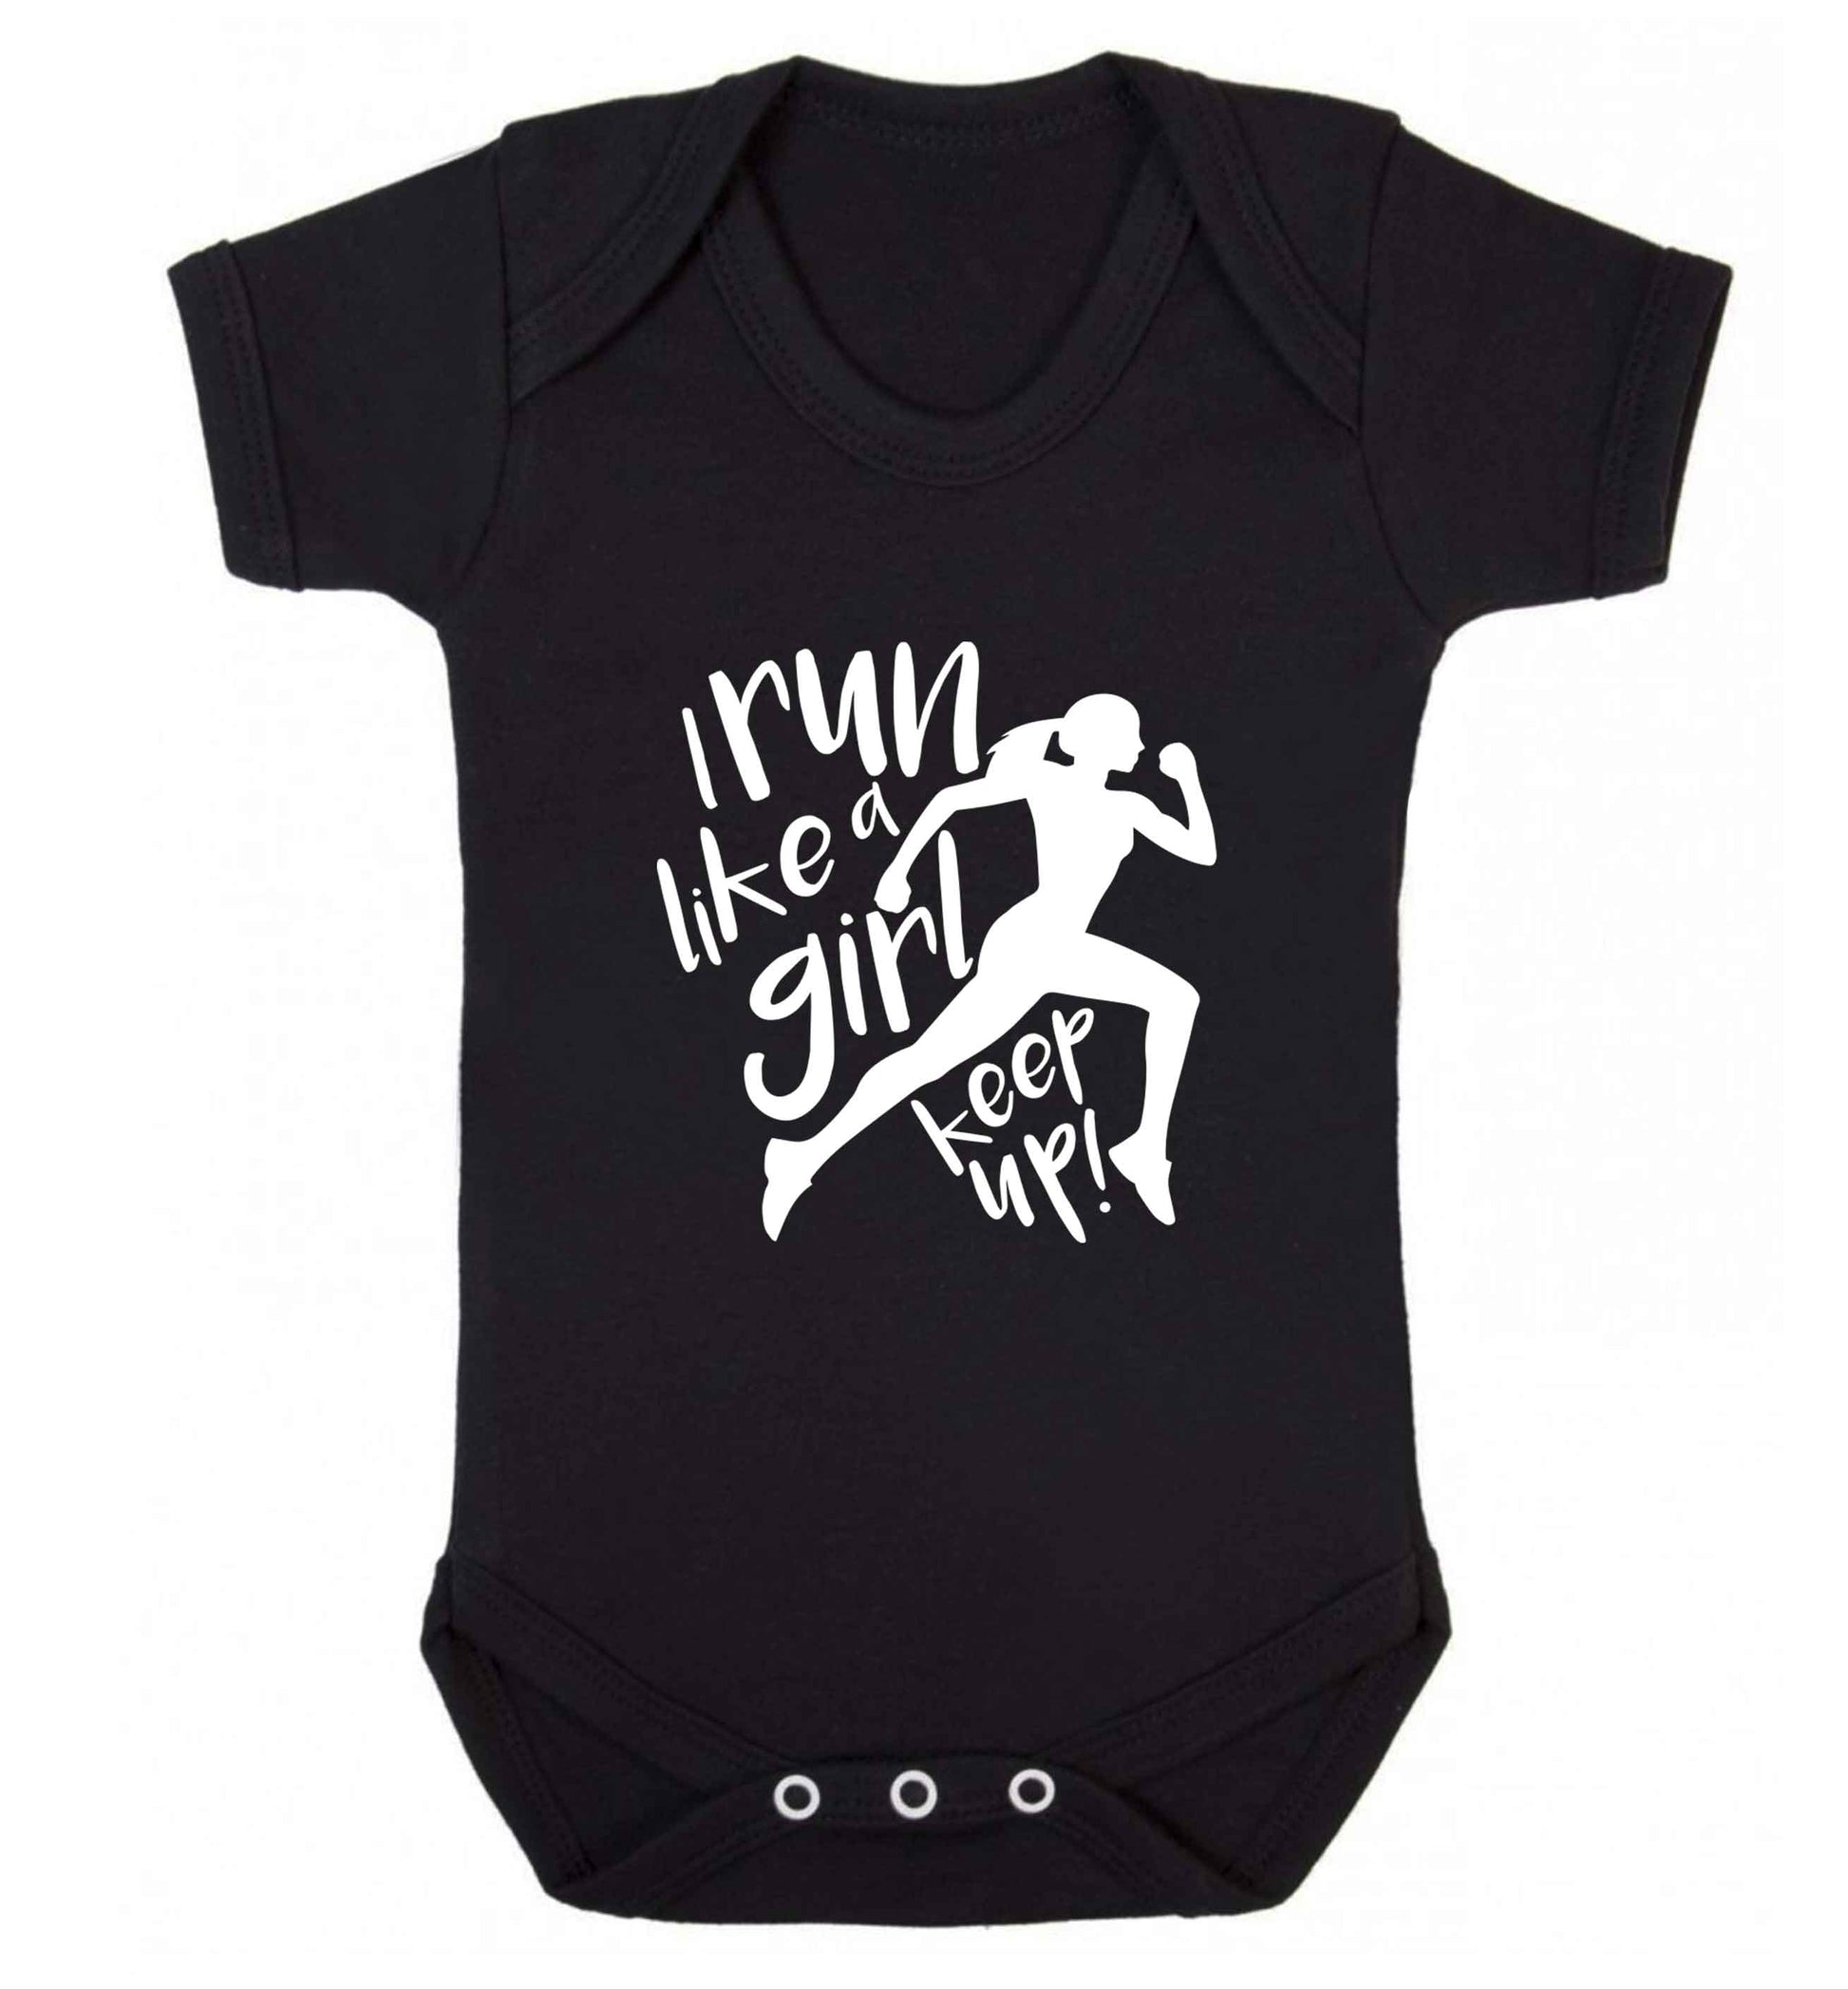 I run like a girl, keep up! baby vest black 18-24 months